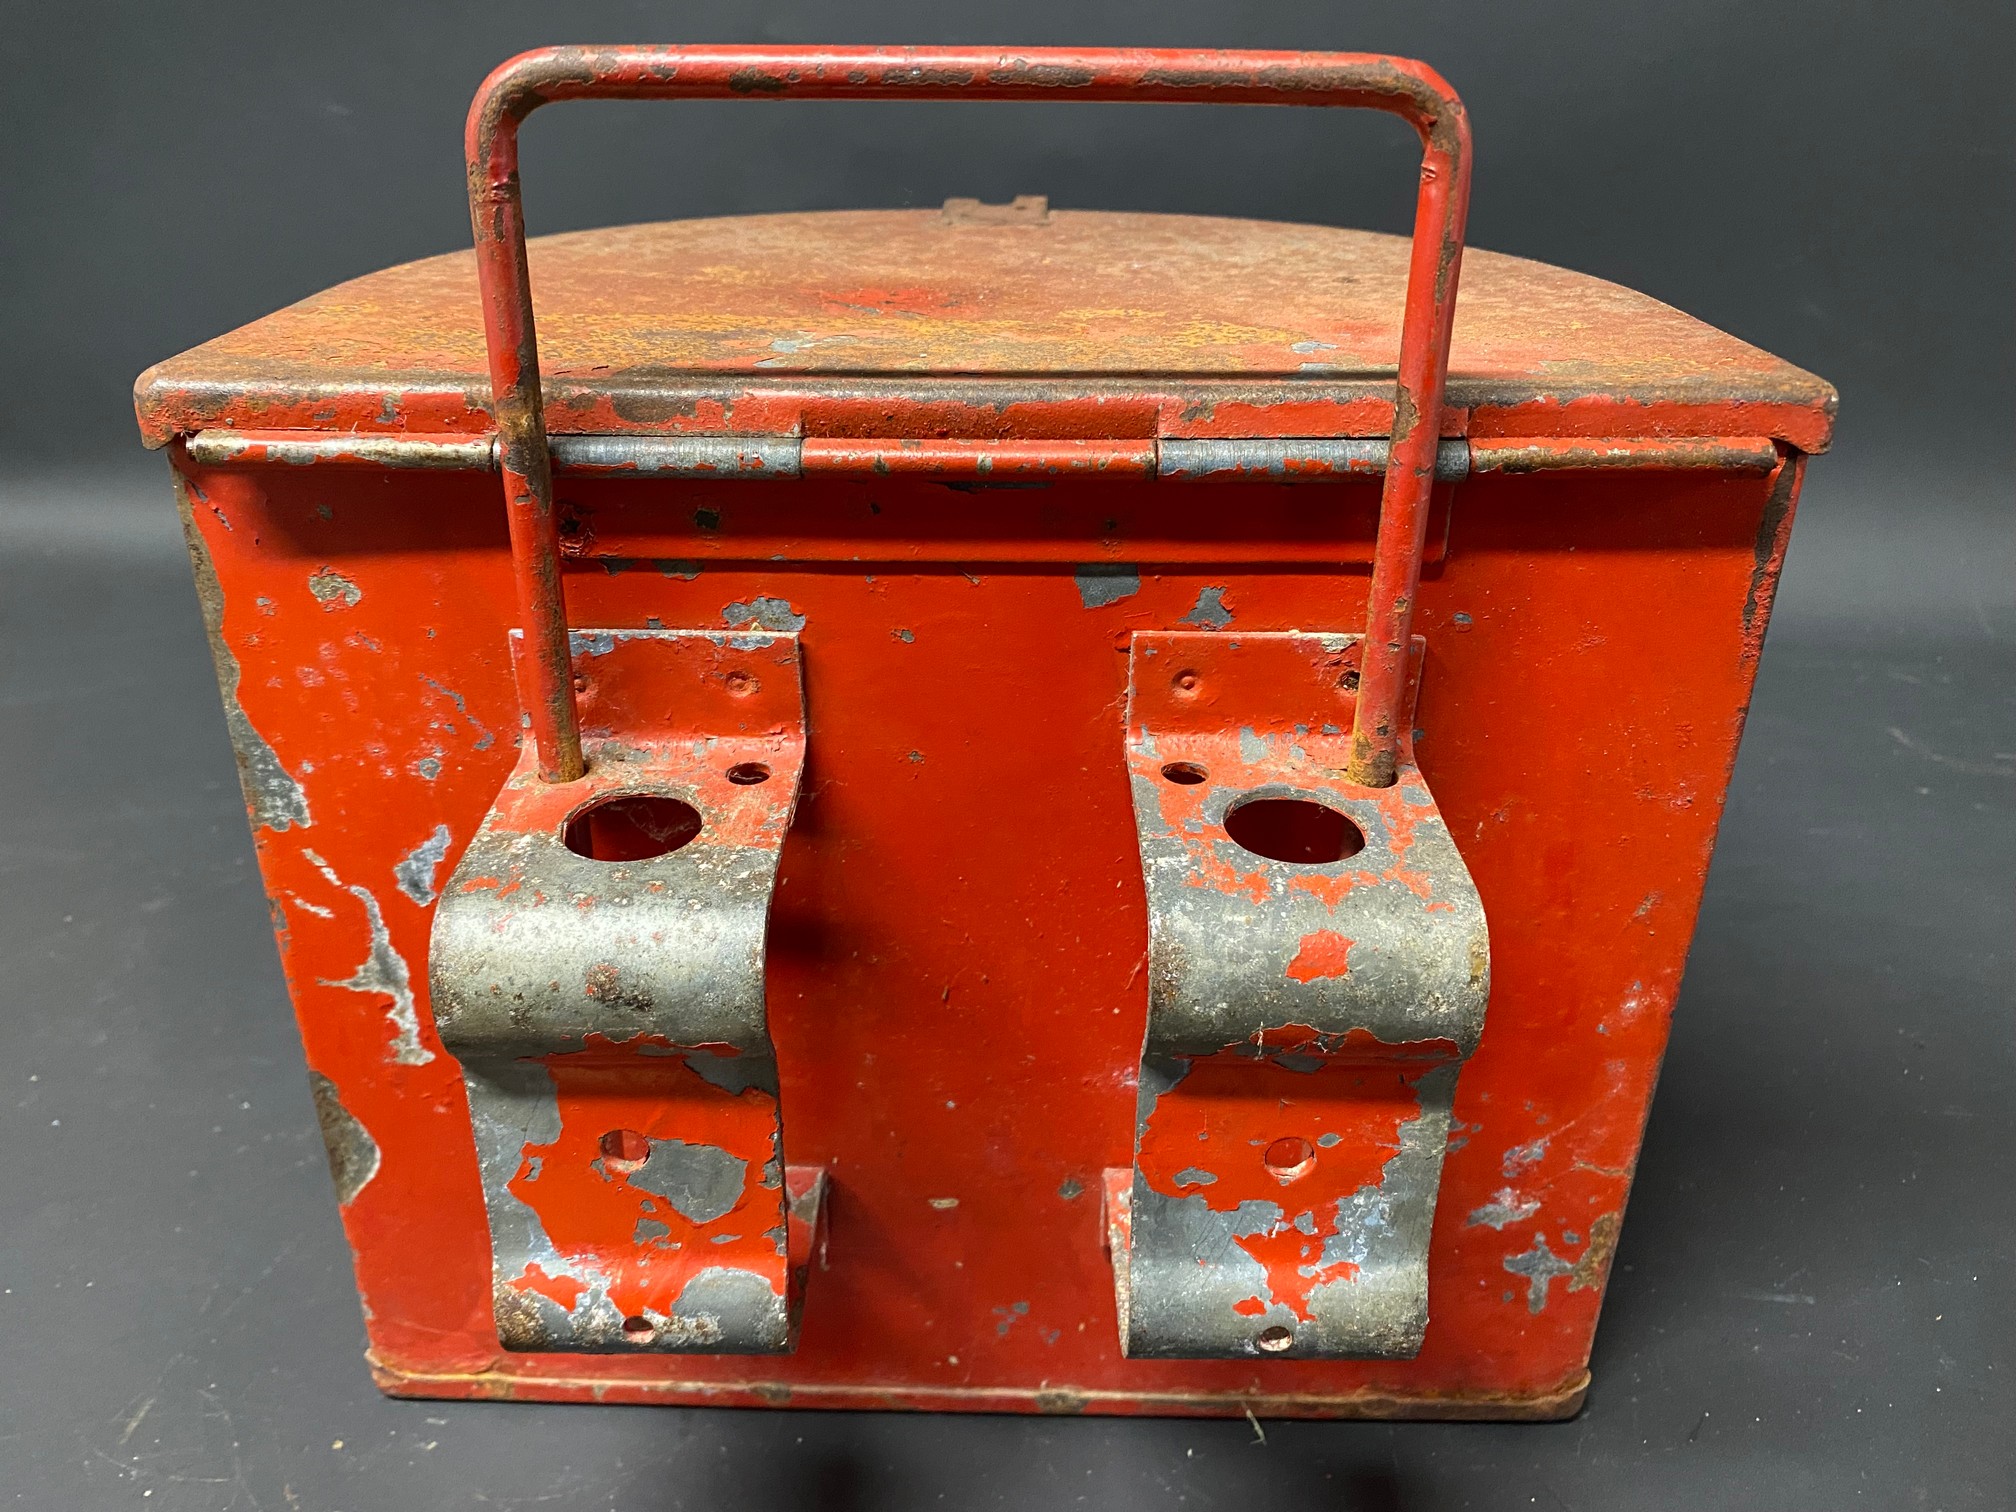 A Wolseley tractor or land implement tool box. - Image 3 of 4